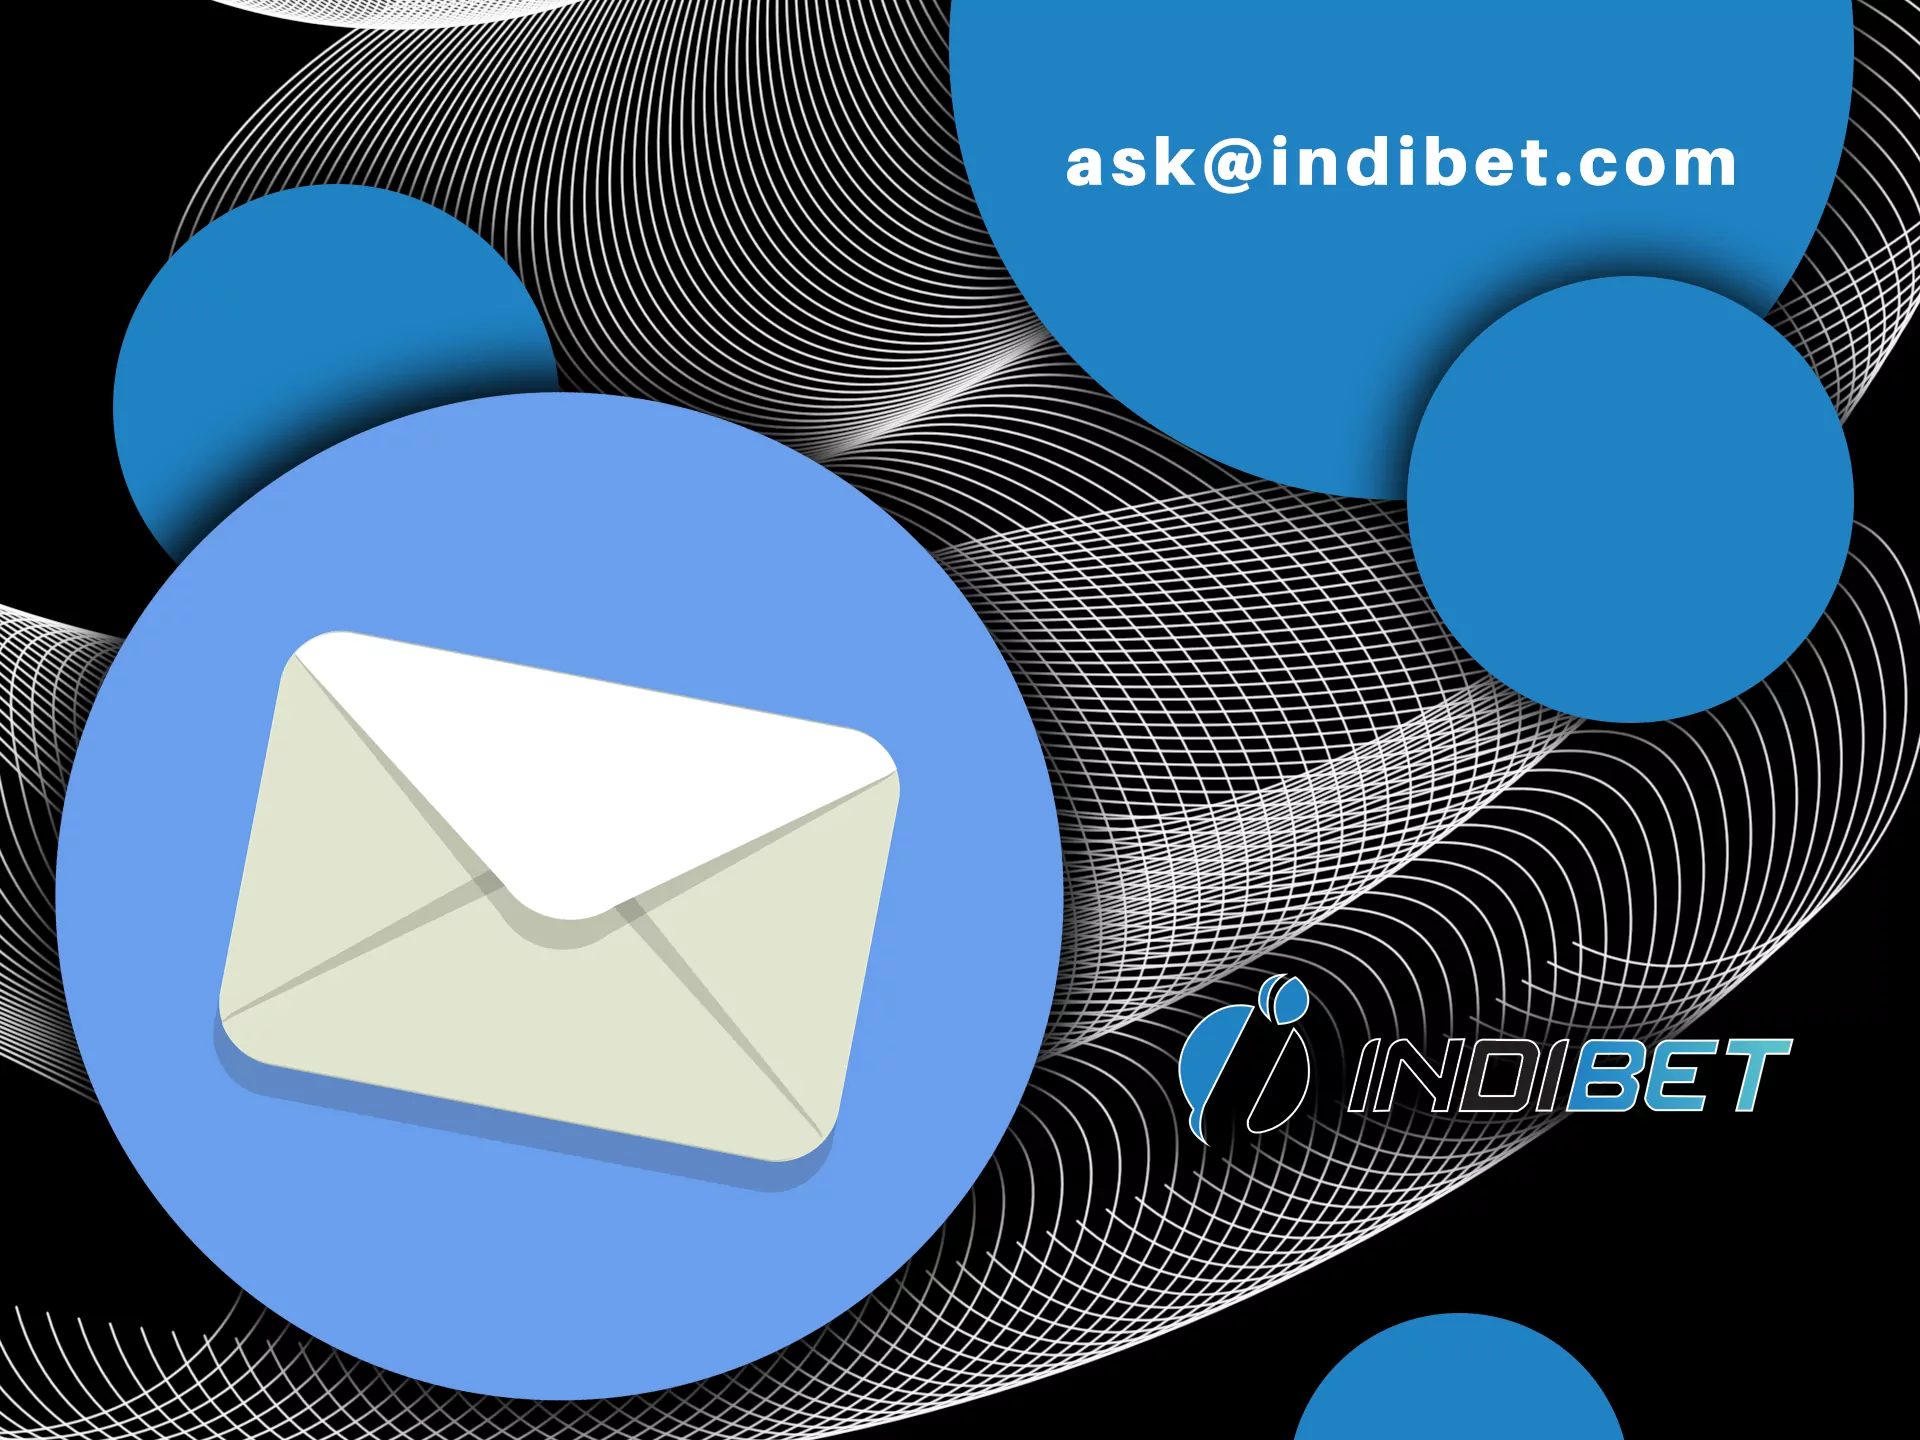 You can send an email to Indibet and explain your problem or ask a question.